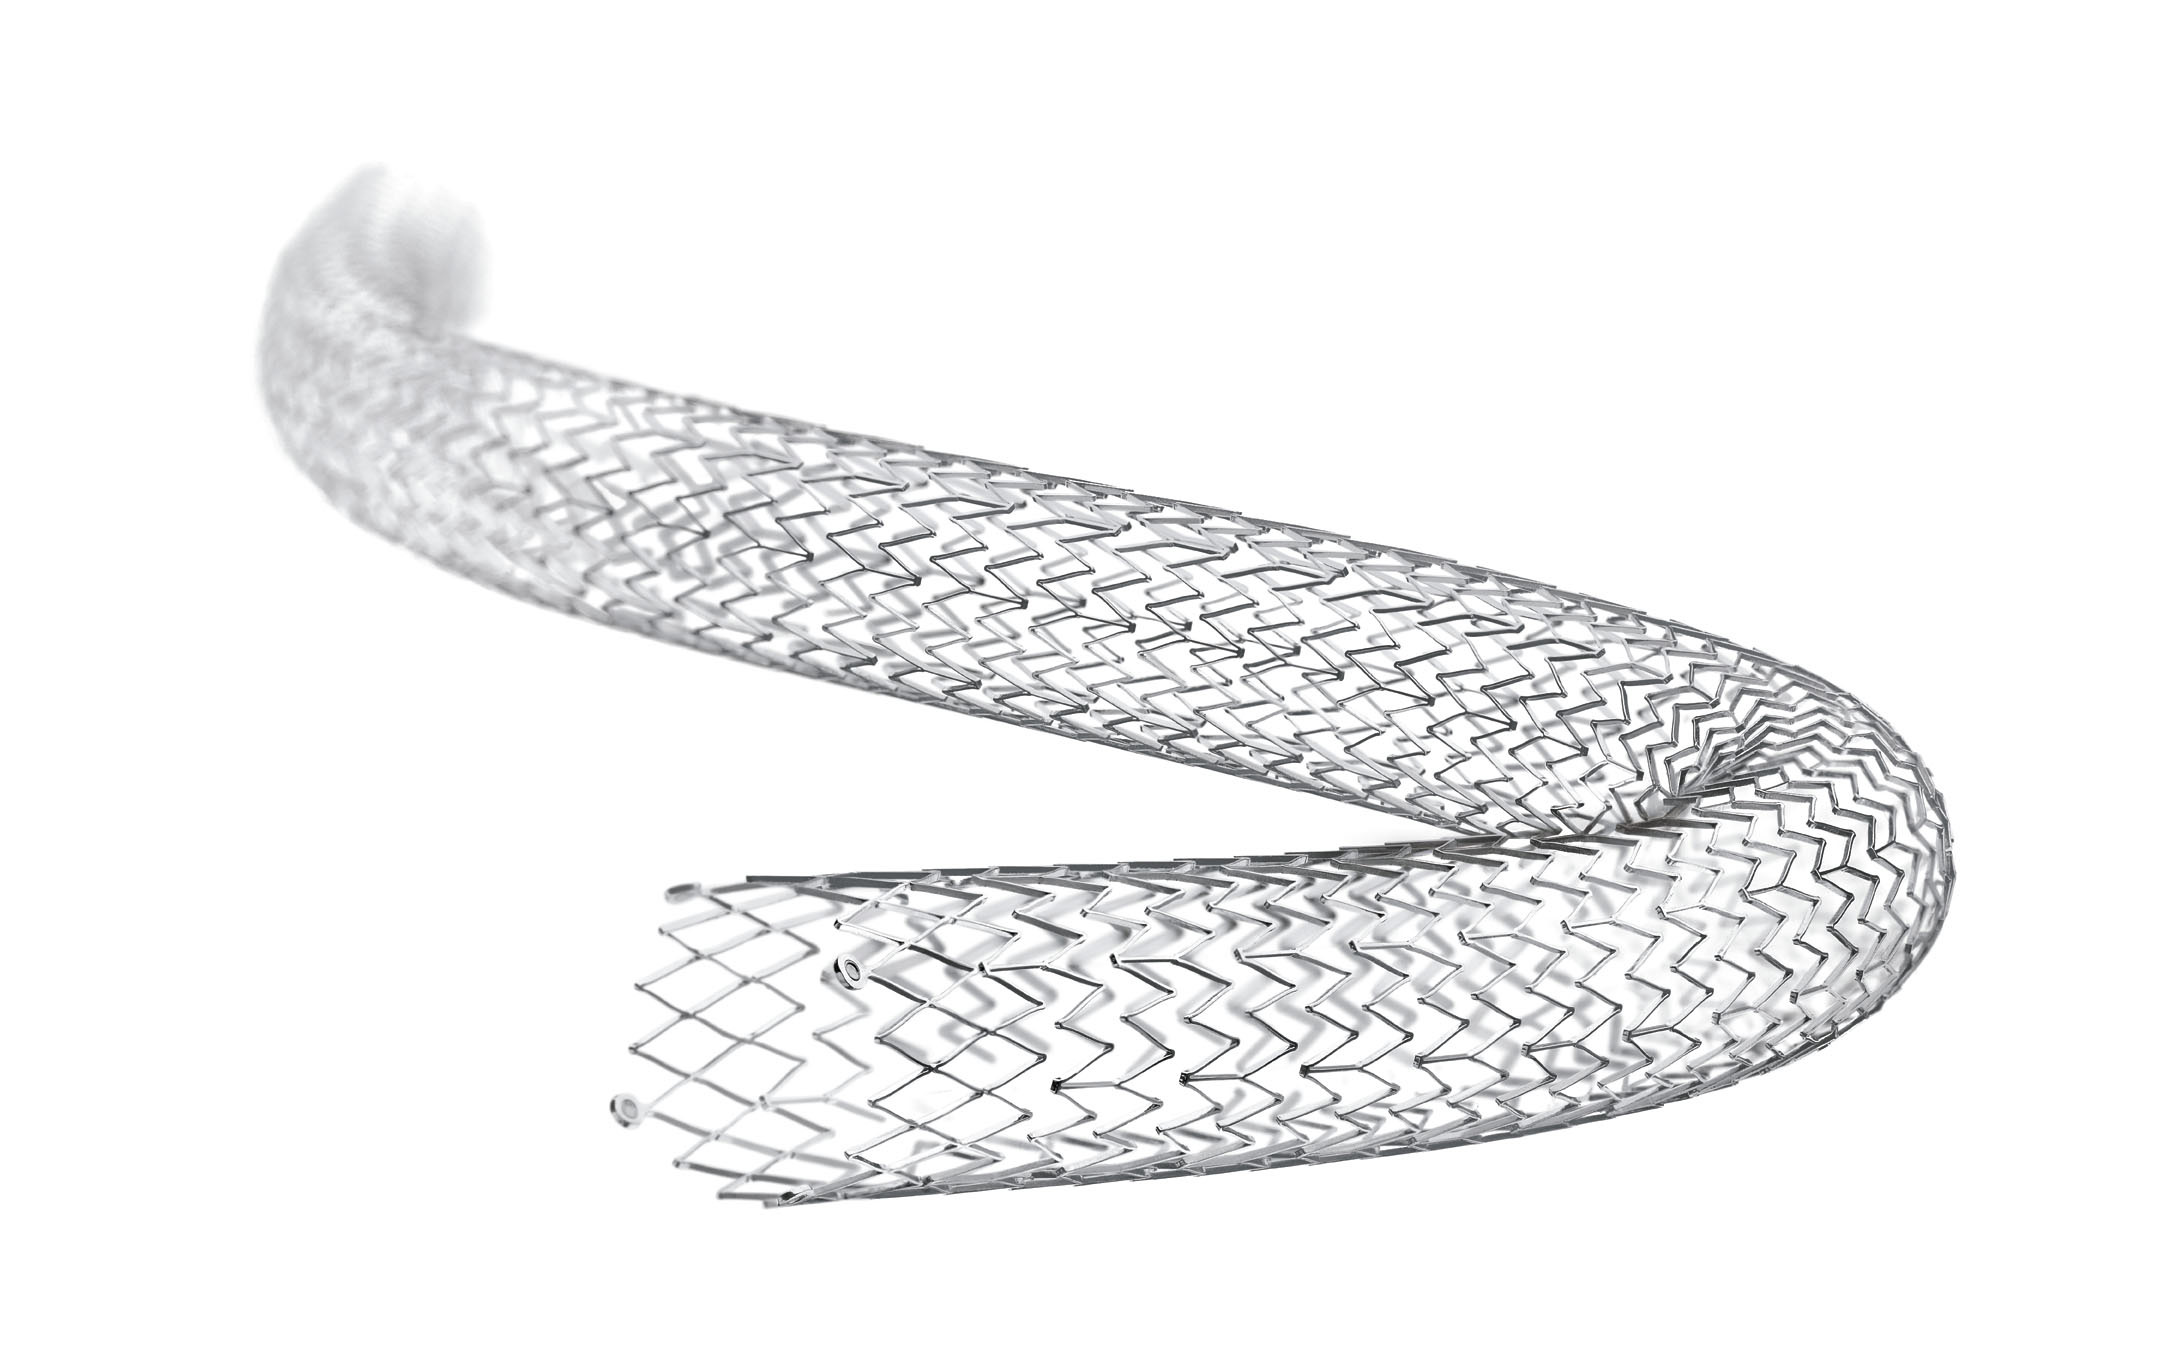 The Eluvia™ Drug-Eluting Vascular Stent System is designed to restore blood flow in arteries above the knee, specifically the superficial femoral artery and proximal popliteal artery. The Eluvia Stent System is pending CE Mark and is not available for use or sale in the U.S.